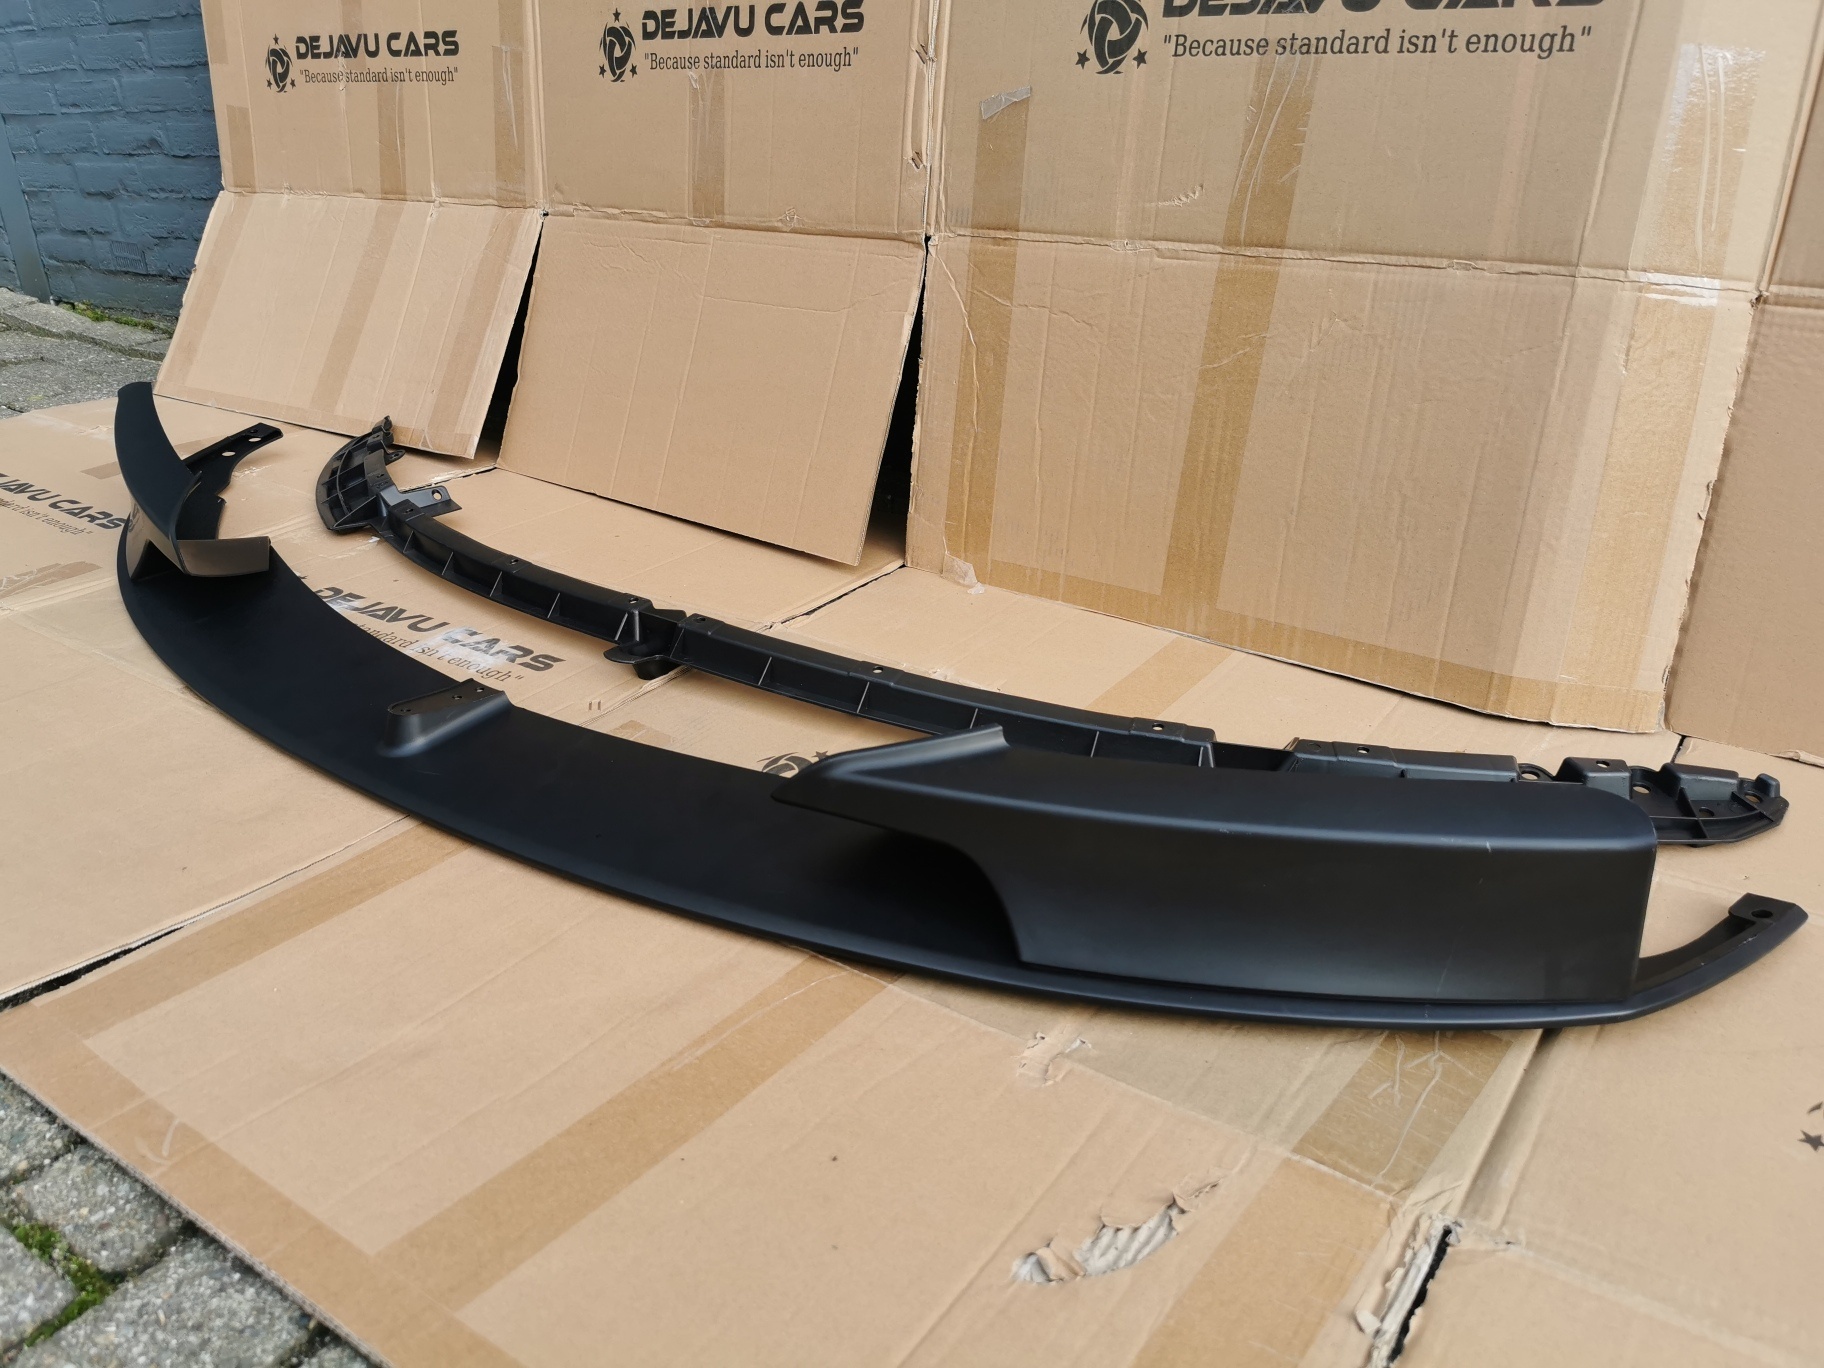 Frontspoiler Sport-Performance for BMW 3 F30 F31 M-Package – MdS Tuning